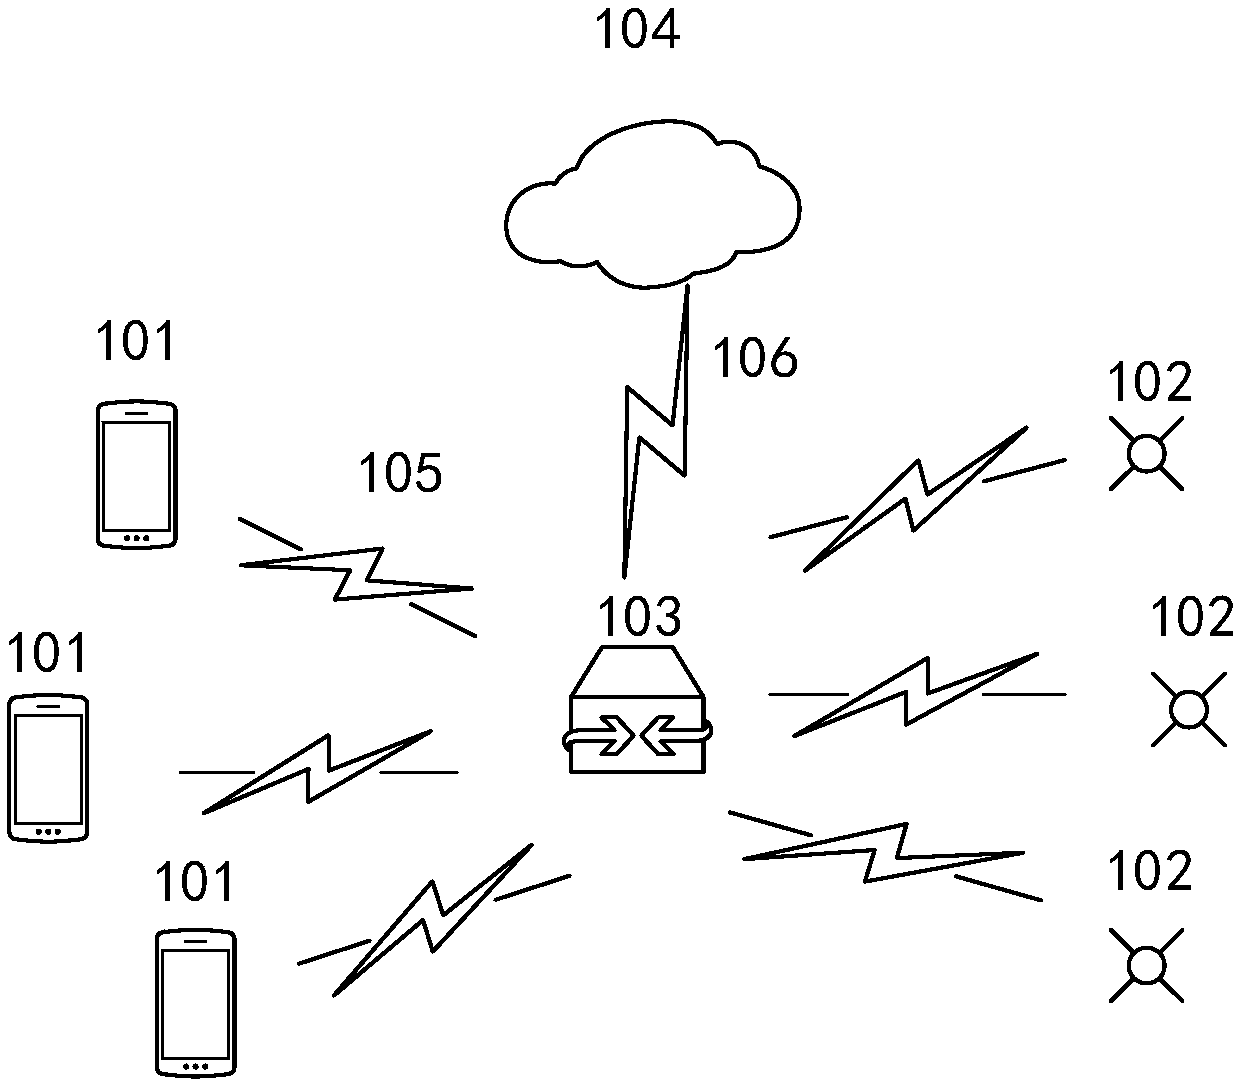 Bluetooth communication methods and devices based on cloud scheduling